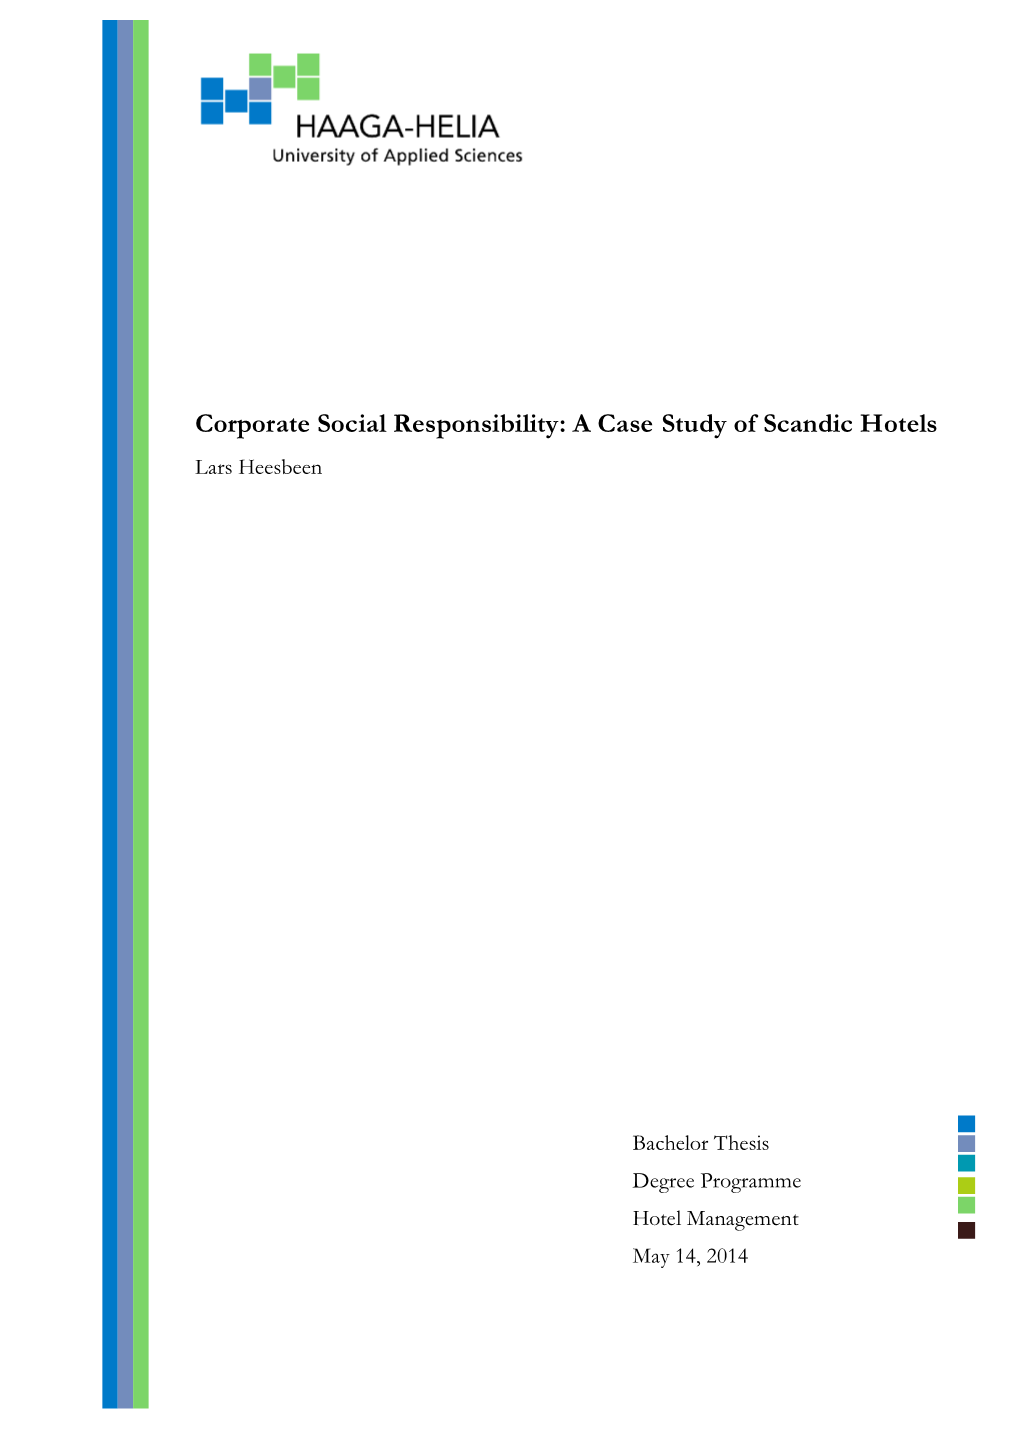 Corporate Social Responsibility: a Case Study of Scandic Hotels Lars Heesbeen